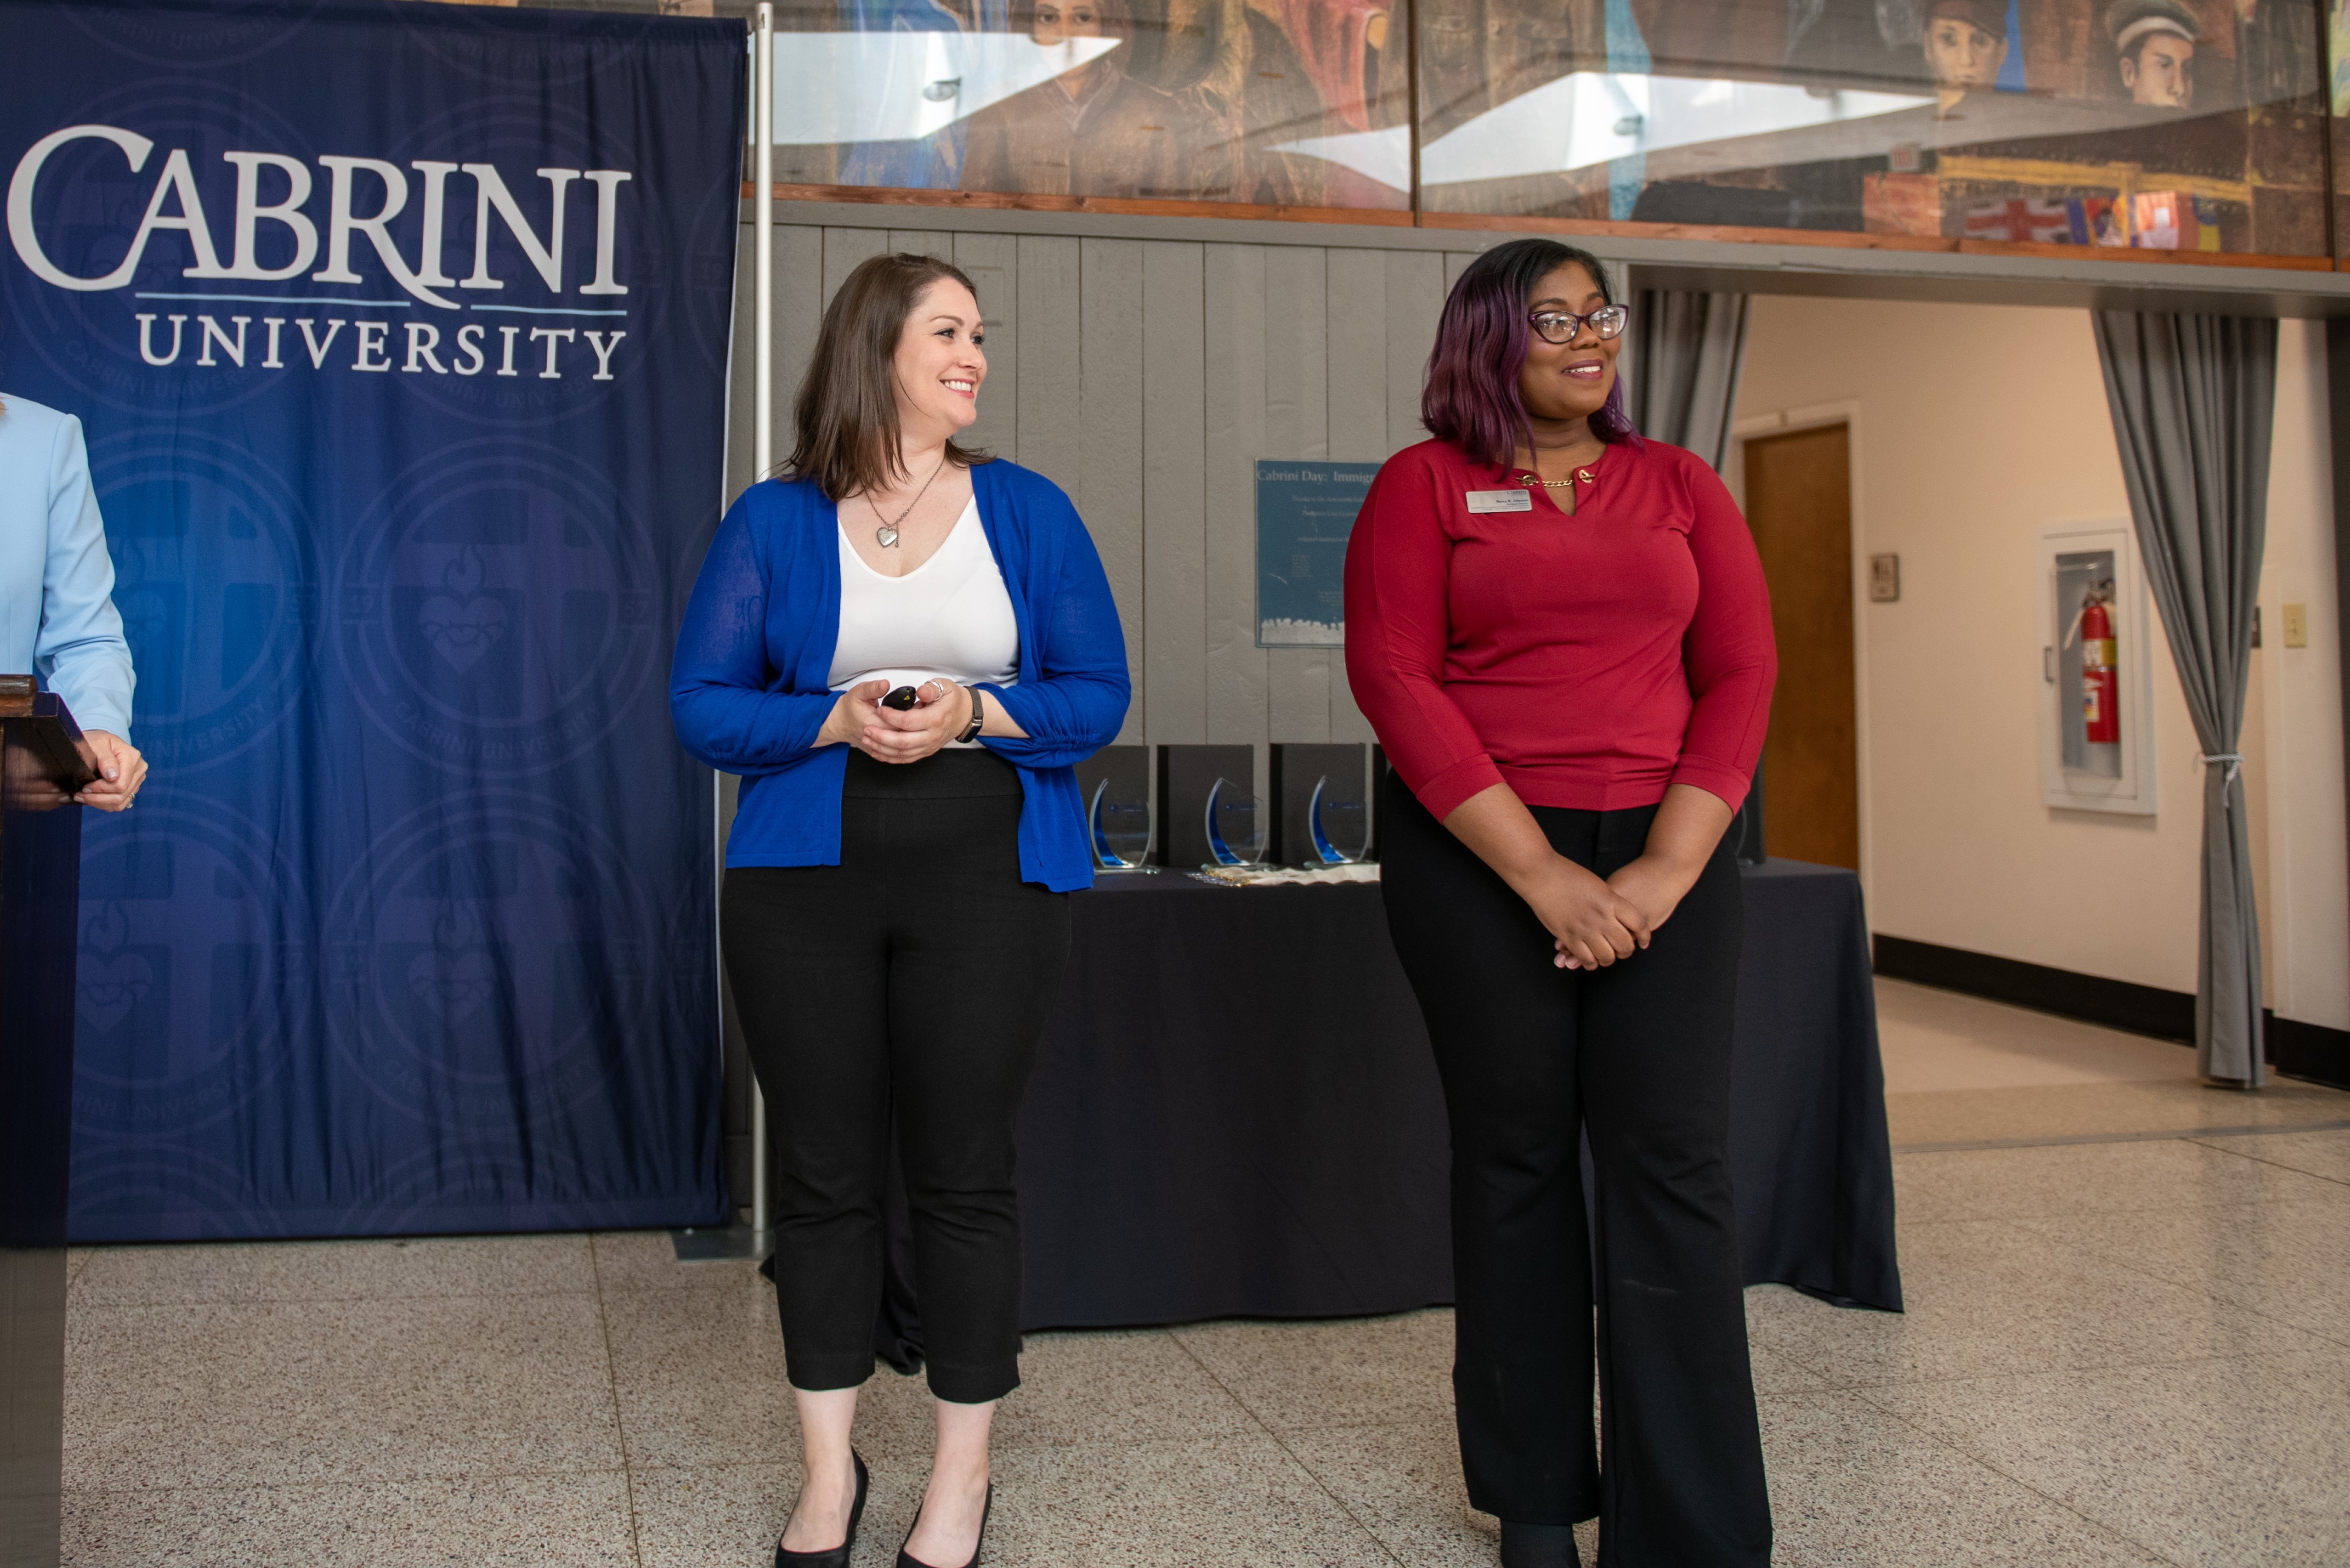 The SEal Director and assistant director stand in front of an audience presenting at Cabrini.